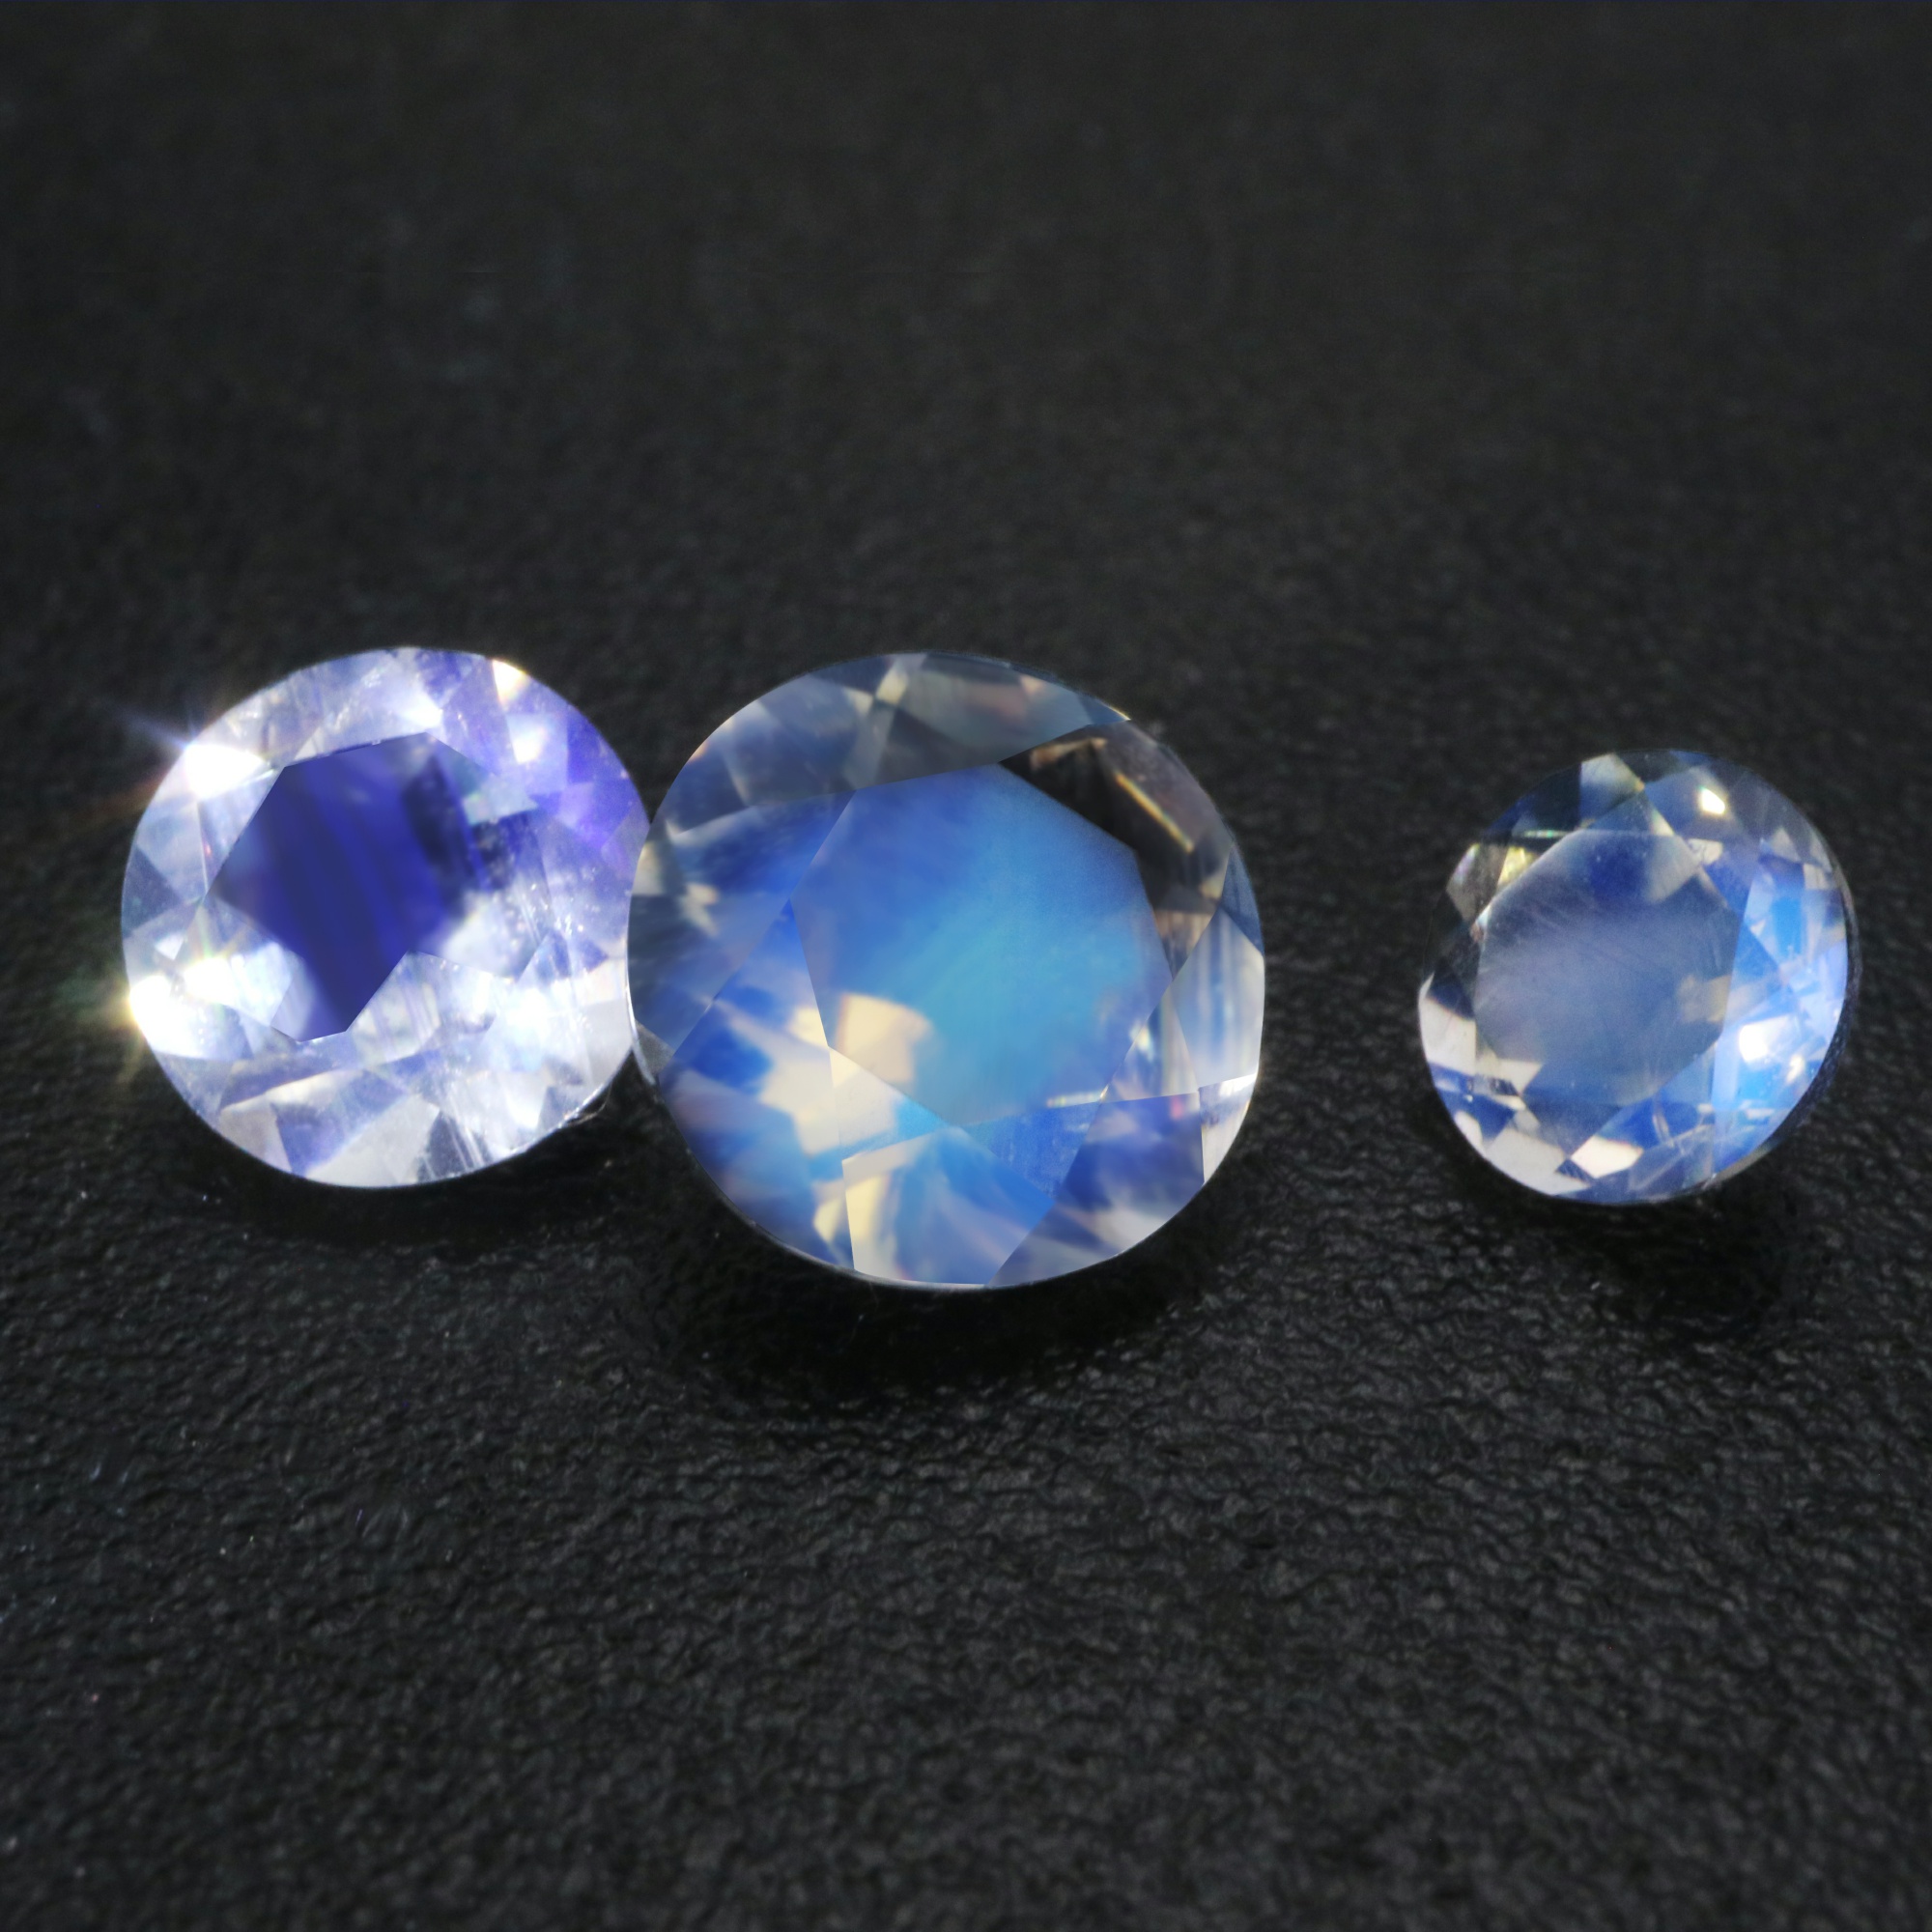 1Pcs Round Blue Moonstone June Birthstone Faceted Cut AAA Grade Loose Gemstone Natural Semi Precious Stone DIY Jewelry Supplies 4110174 - Click Image to Close